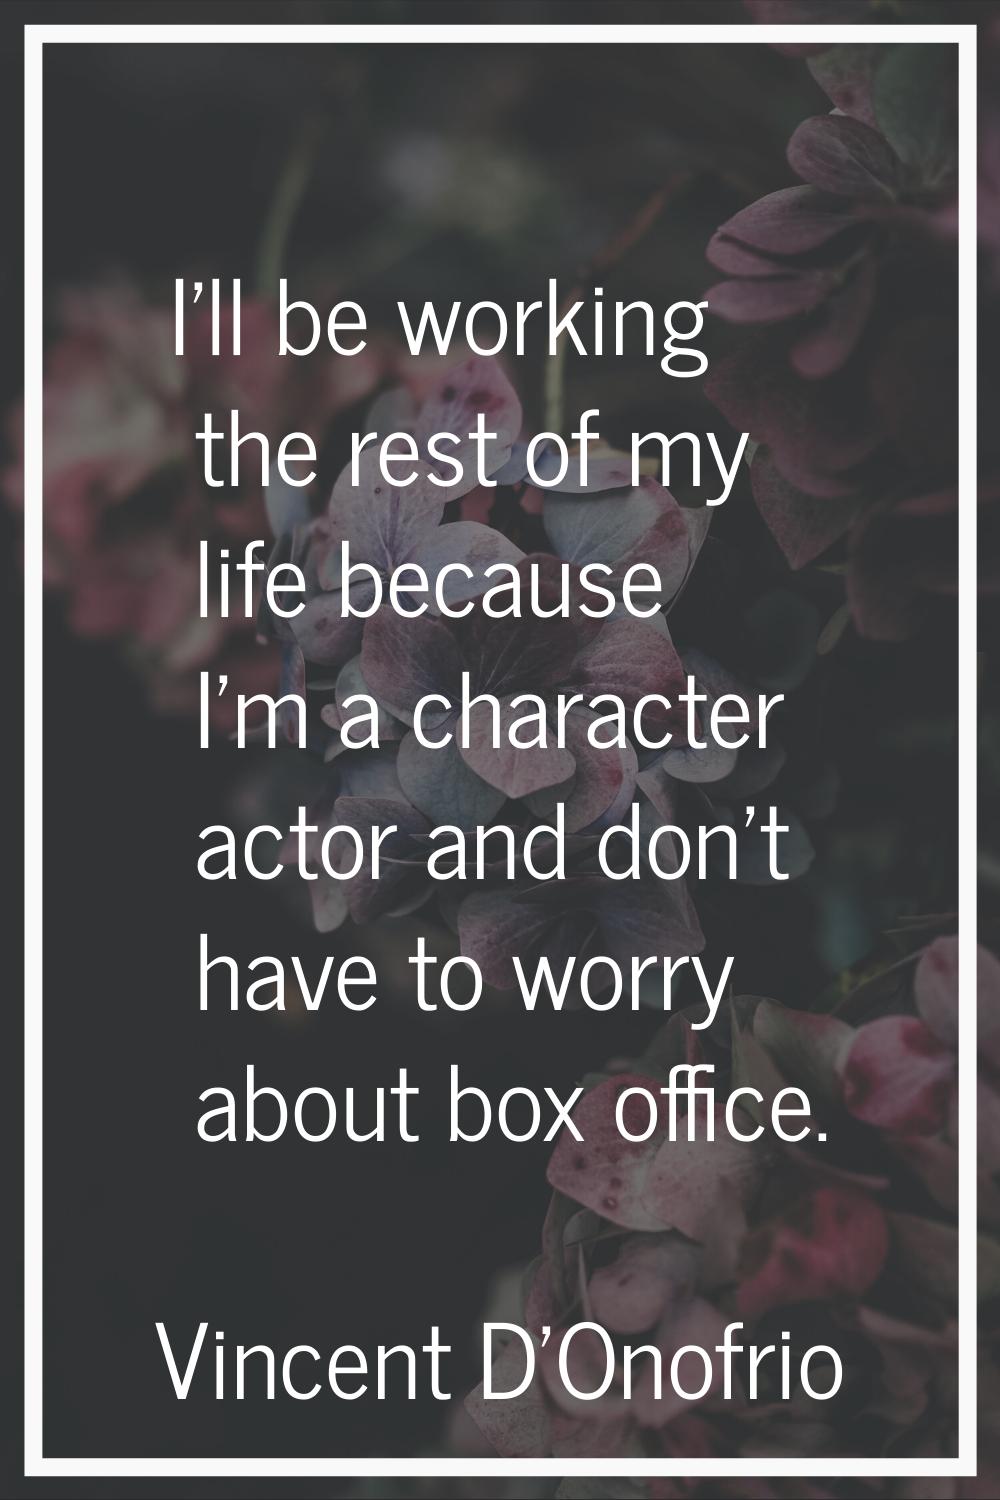 I'll be working the rest of my life because I'm a character actor and don't have to worry about box